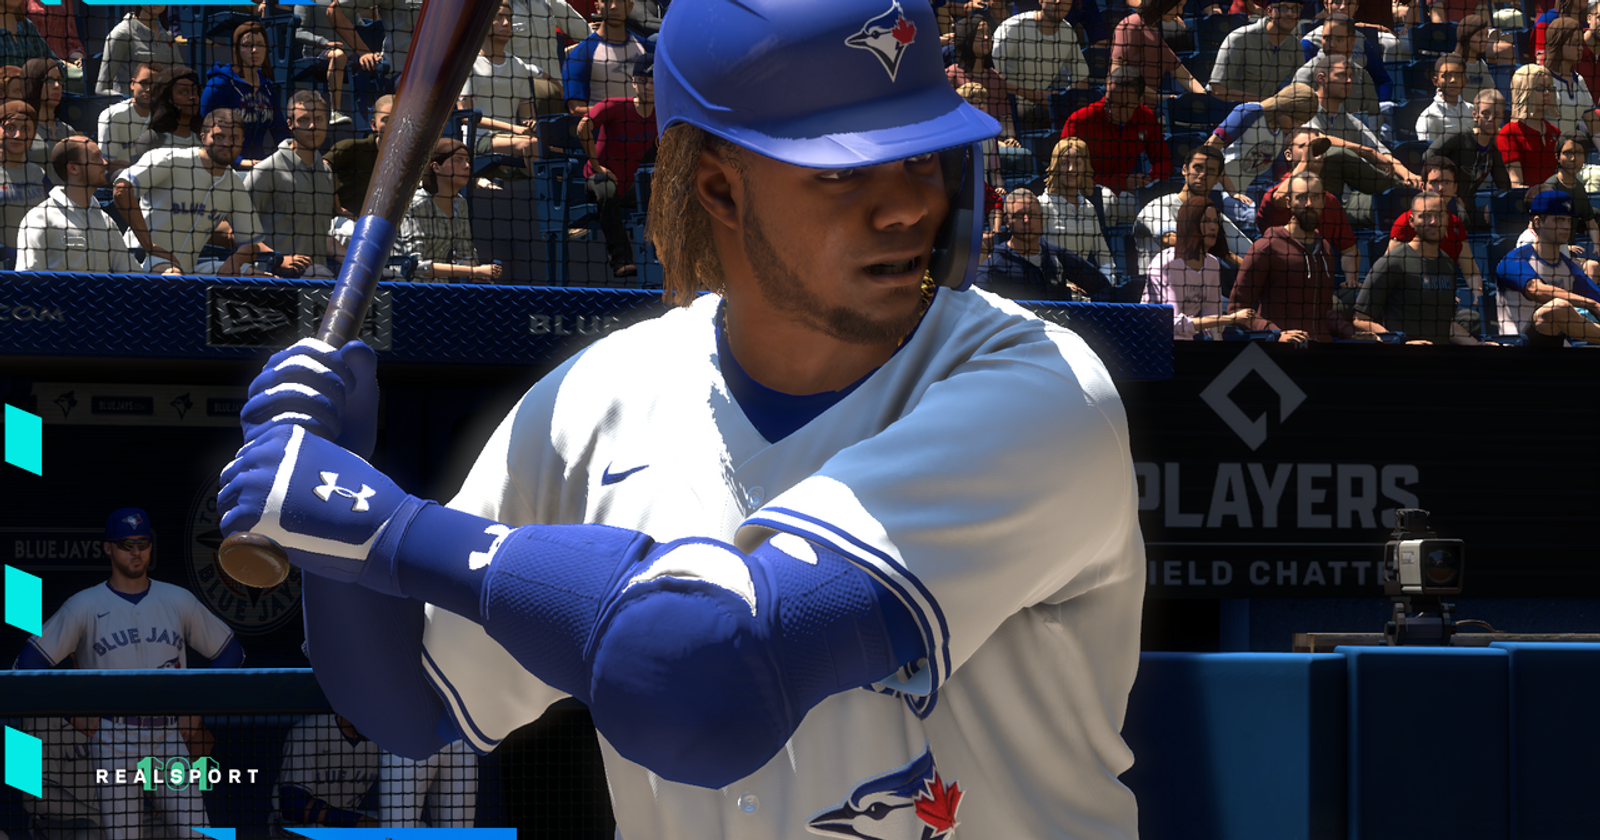 UPDATED* MLB The Show 22 Release Date: Official date set for early-April  more reveals incoming